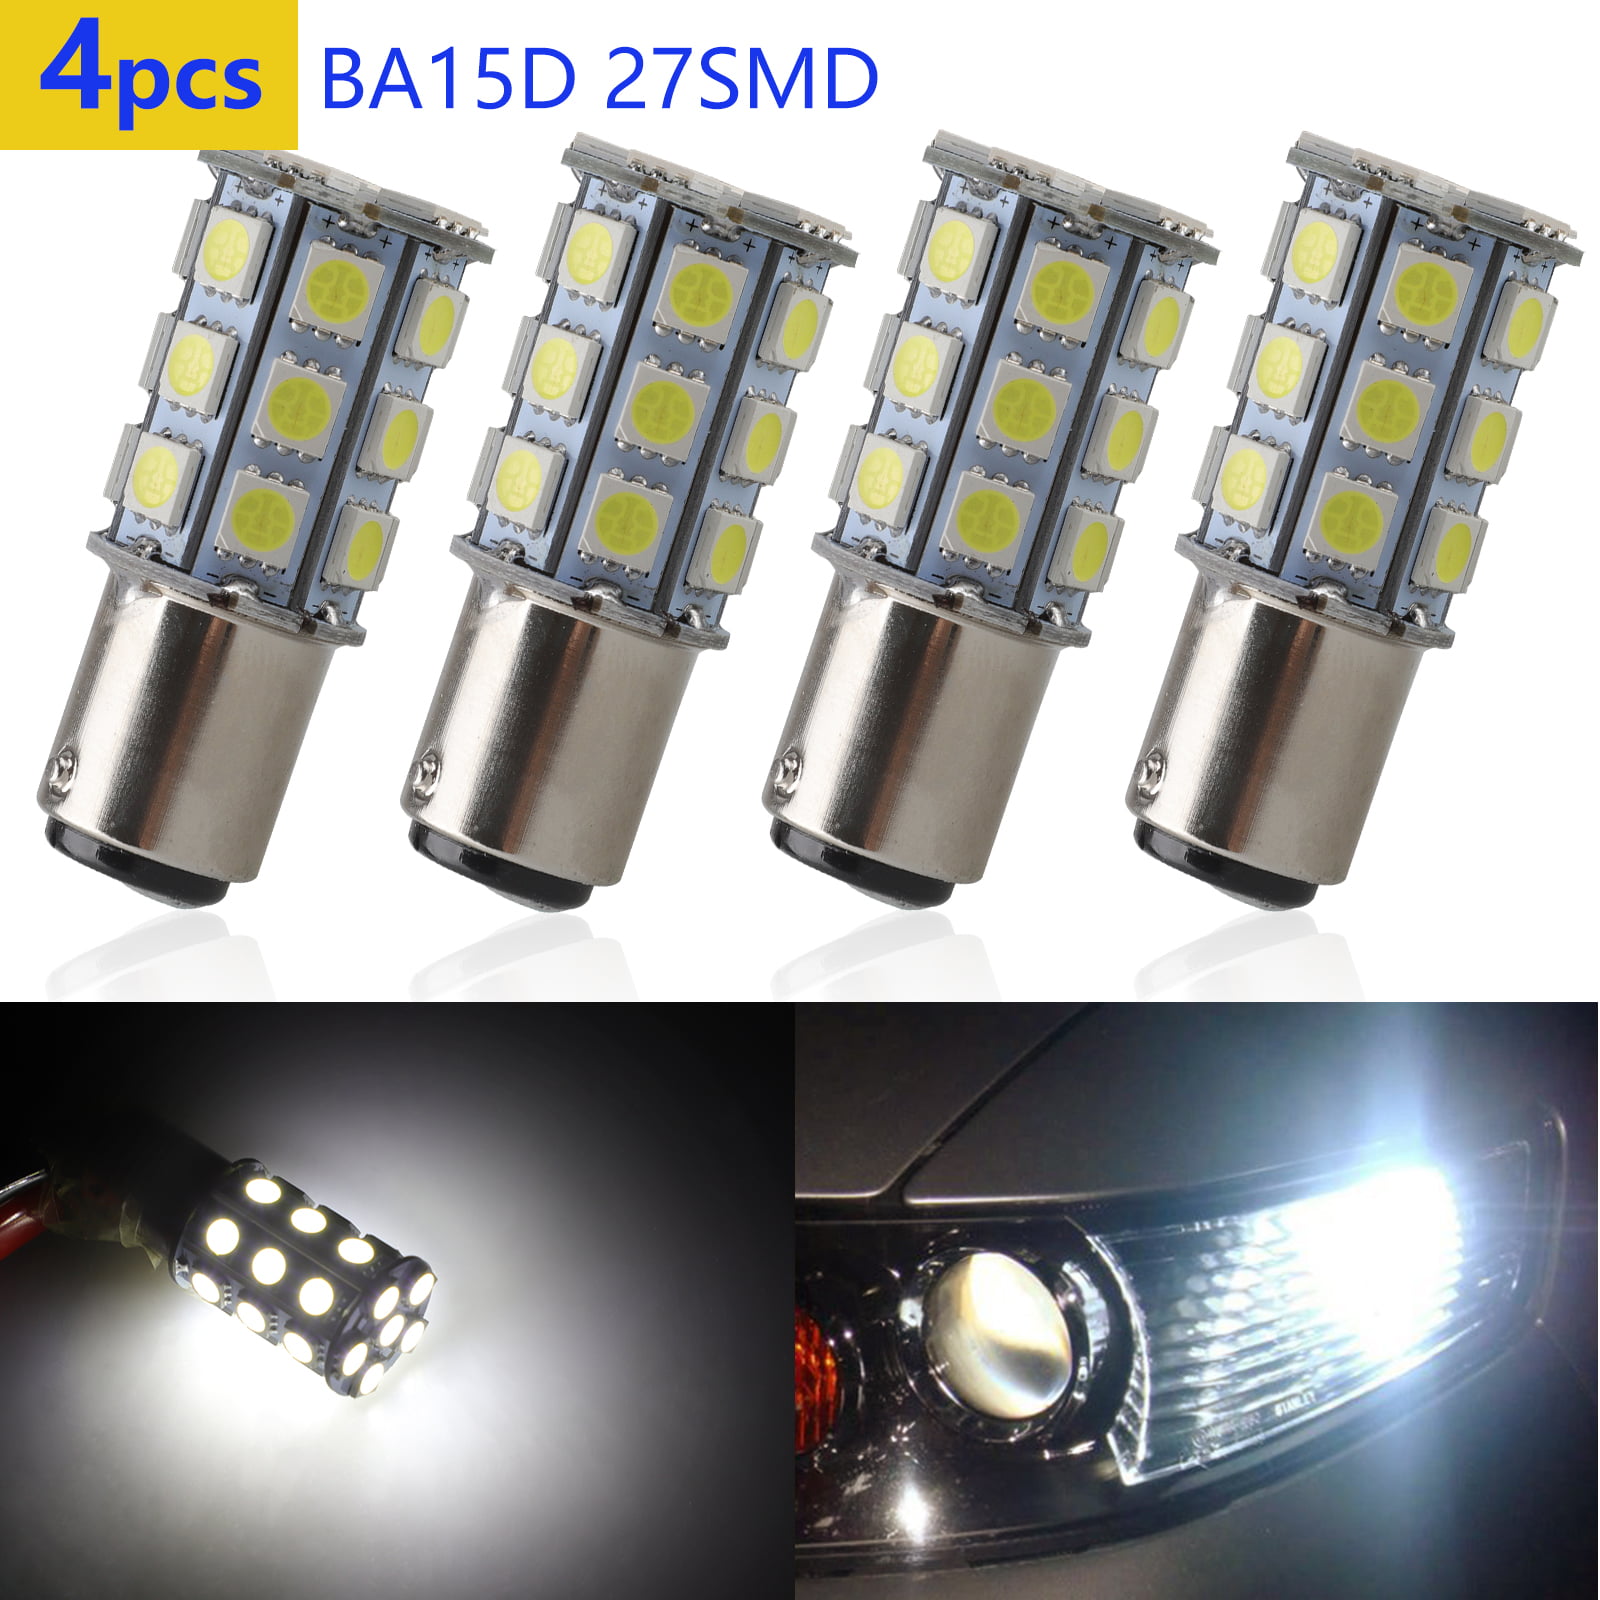 Pack of 10 1178 LED 5050 18-SMD White 1076 LED Bulb Replacement For 12V RV Interior Ceiling Dome Light/Travel Trailer/Boat Indoor/Camper Light Bulbs UNXMRFF Super Bright 1142 BA15D LED Bulbs 